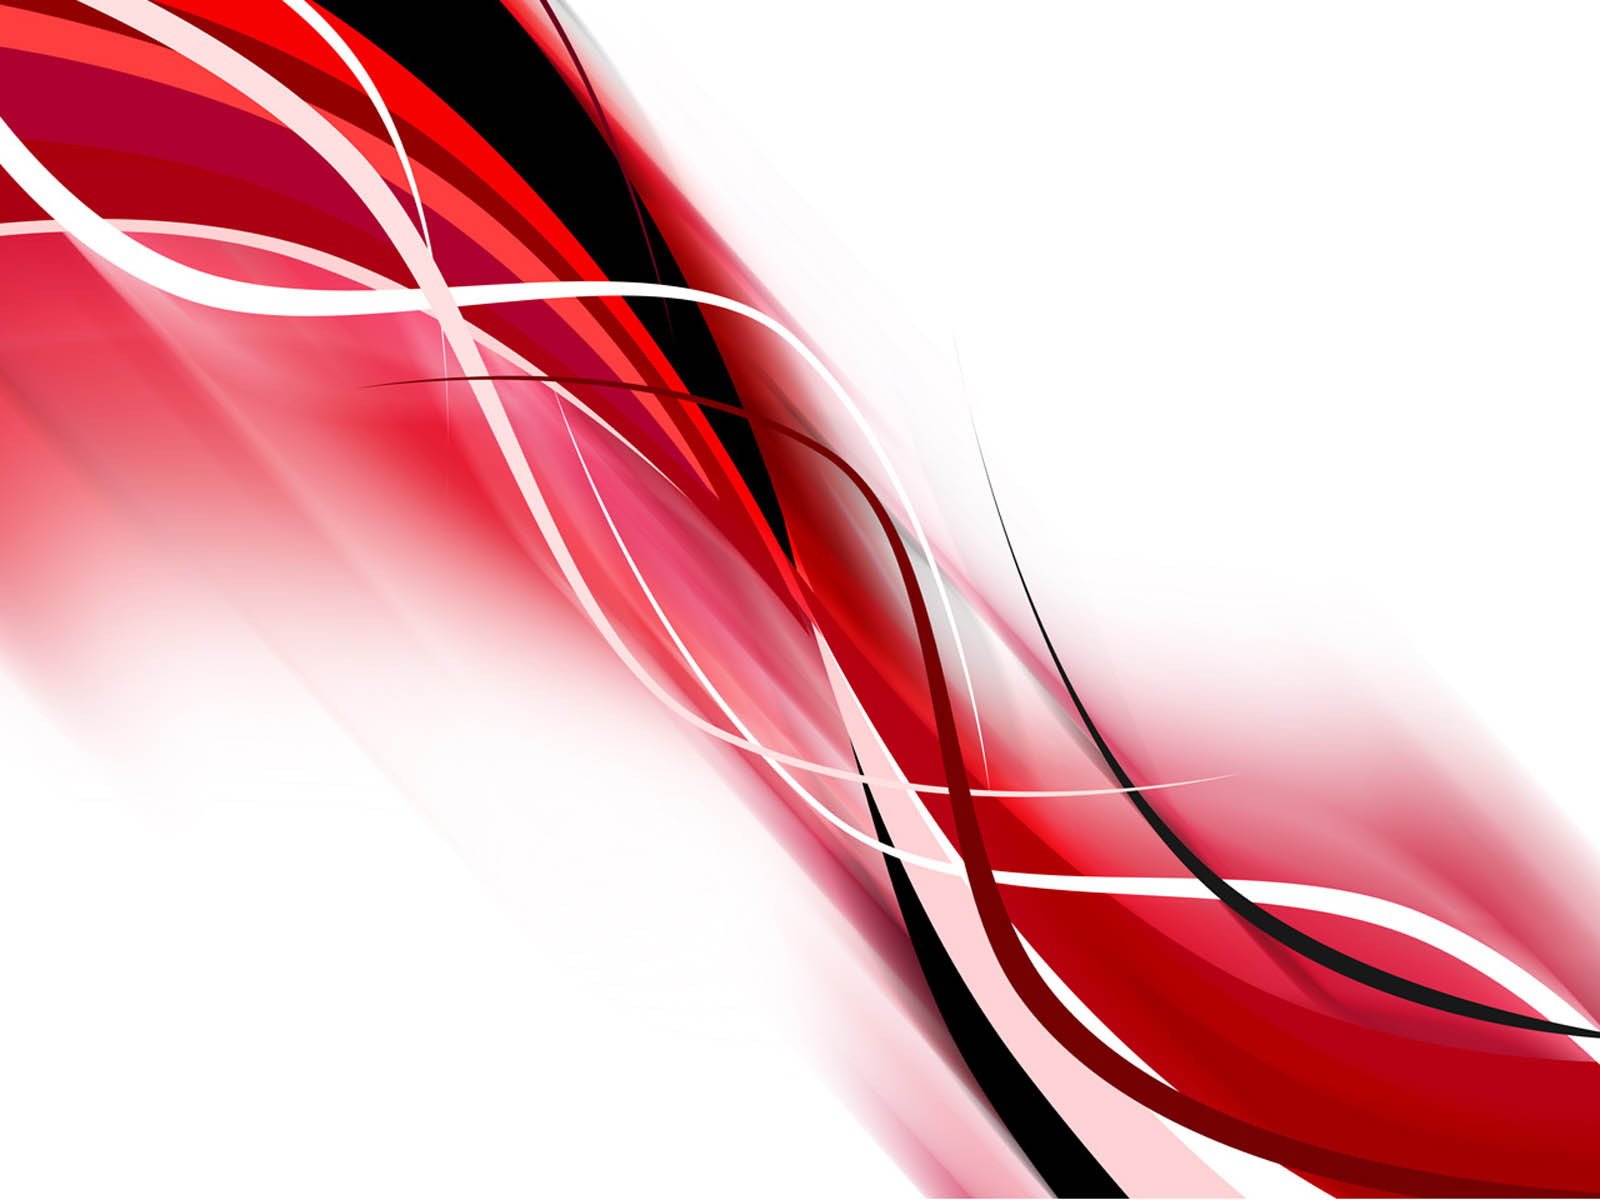 Tag Abstract Red Wallpapers Backgrounds Photos Pictures and 1600x1200